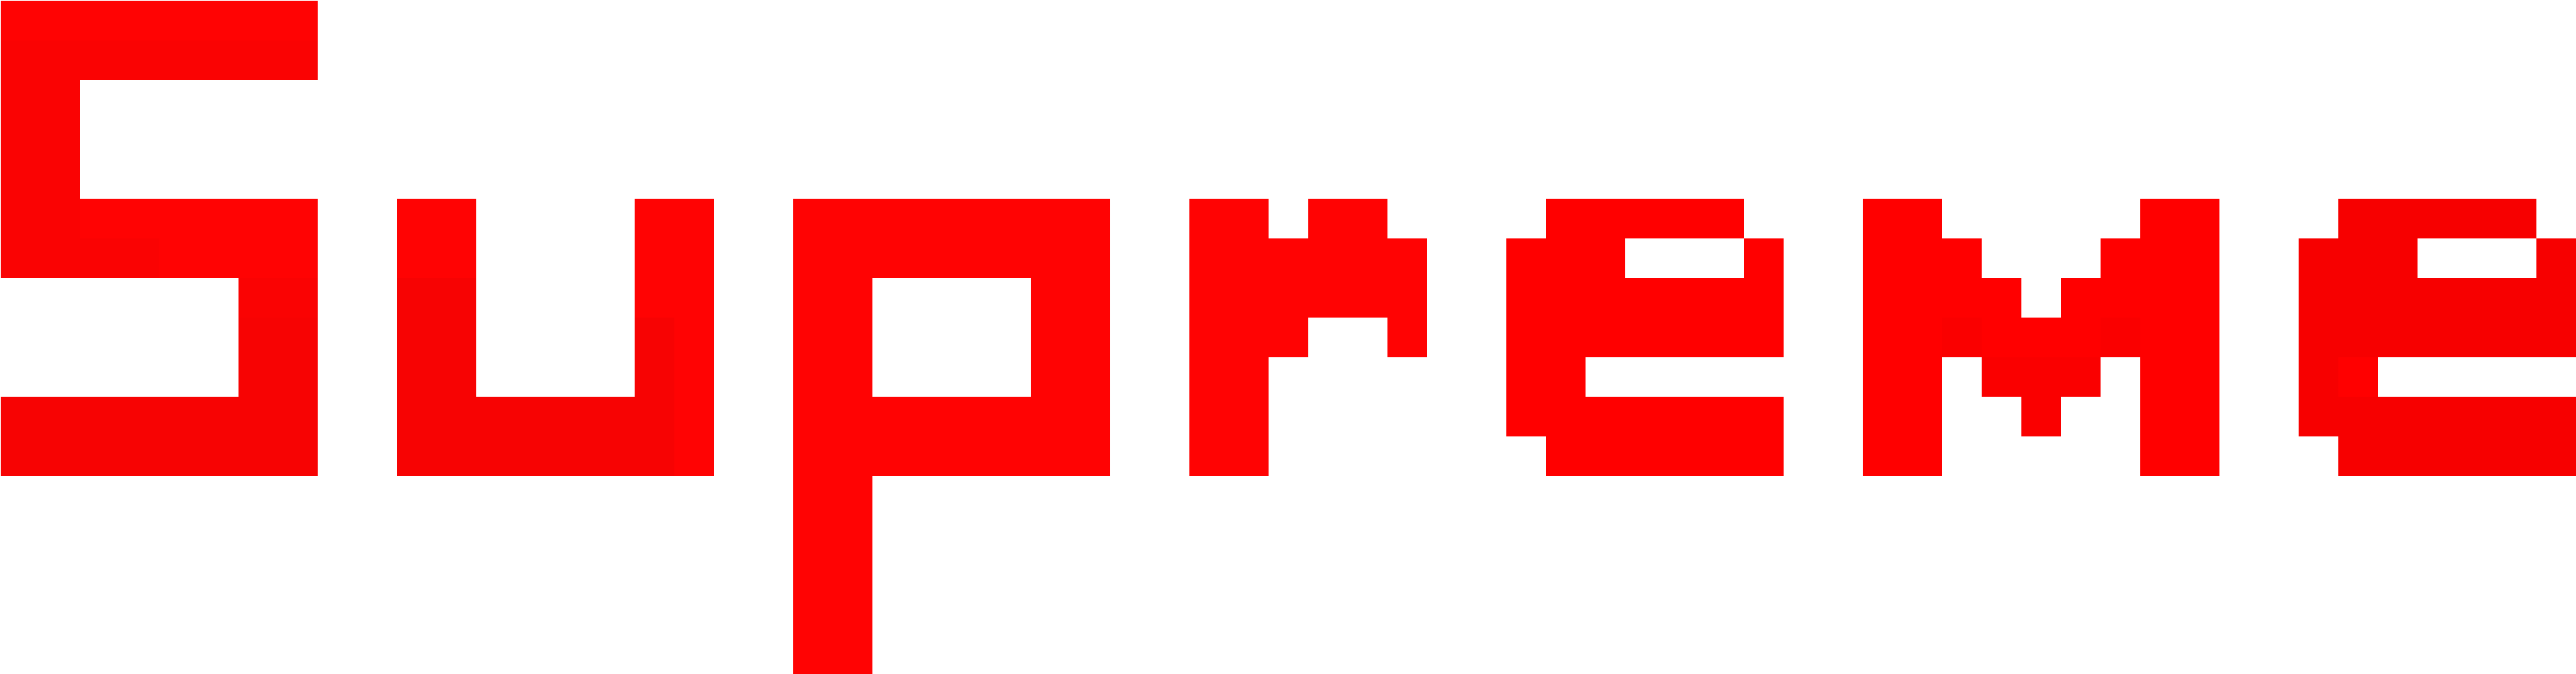 Red Letters On A Black Background